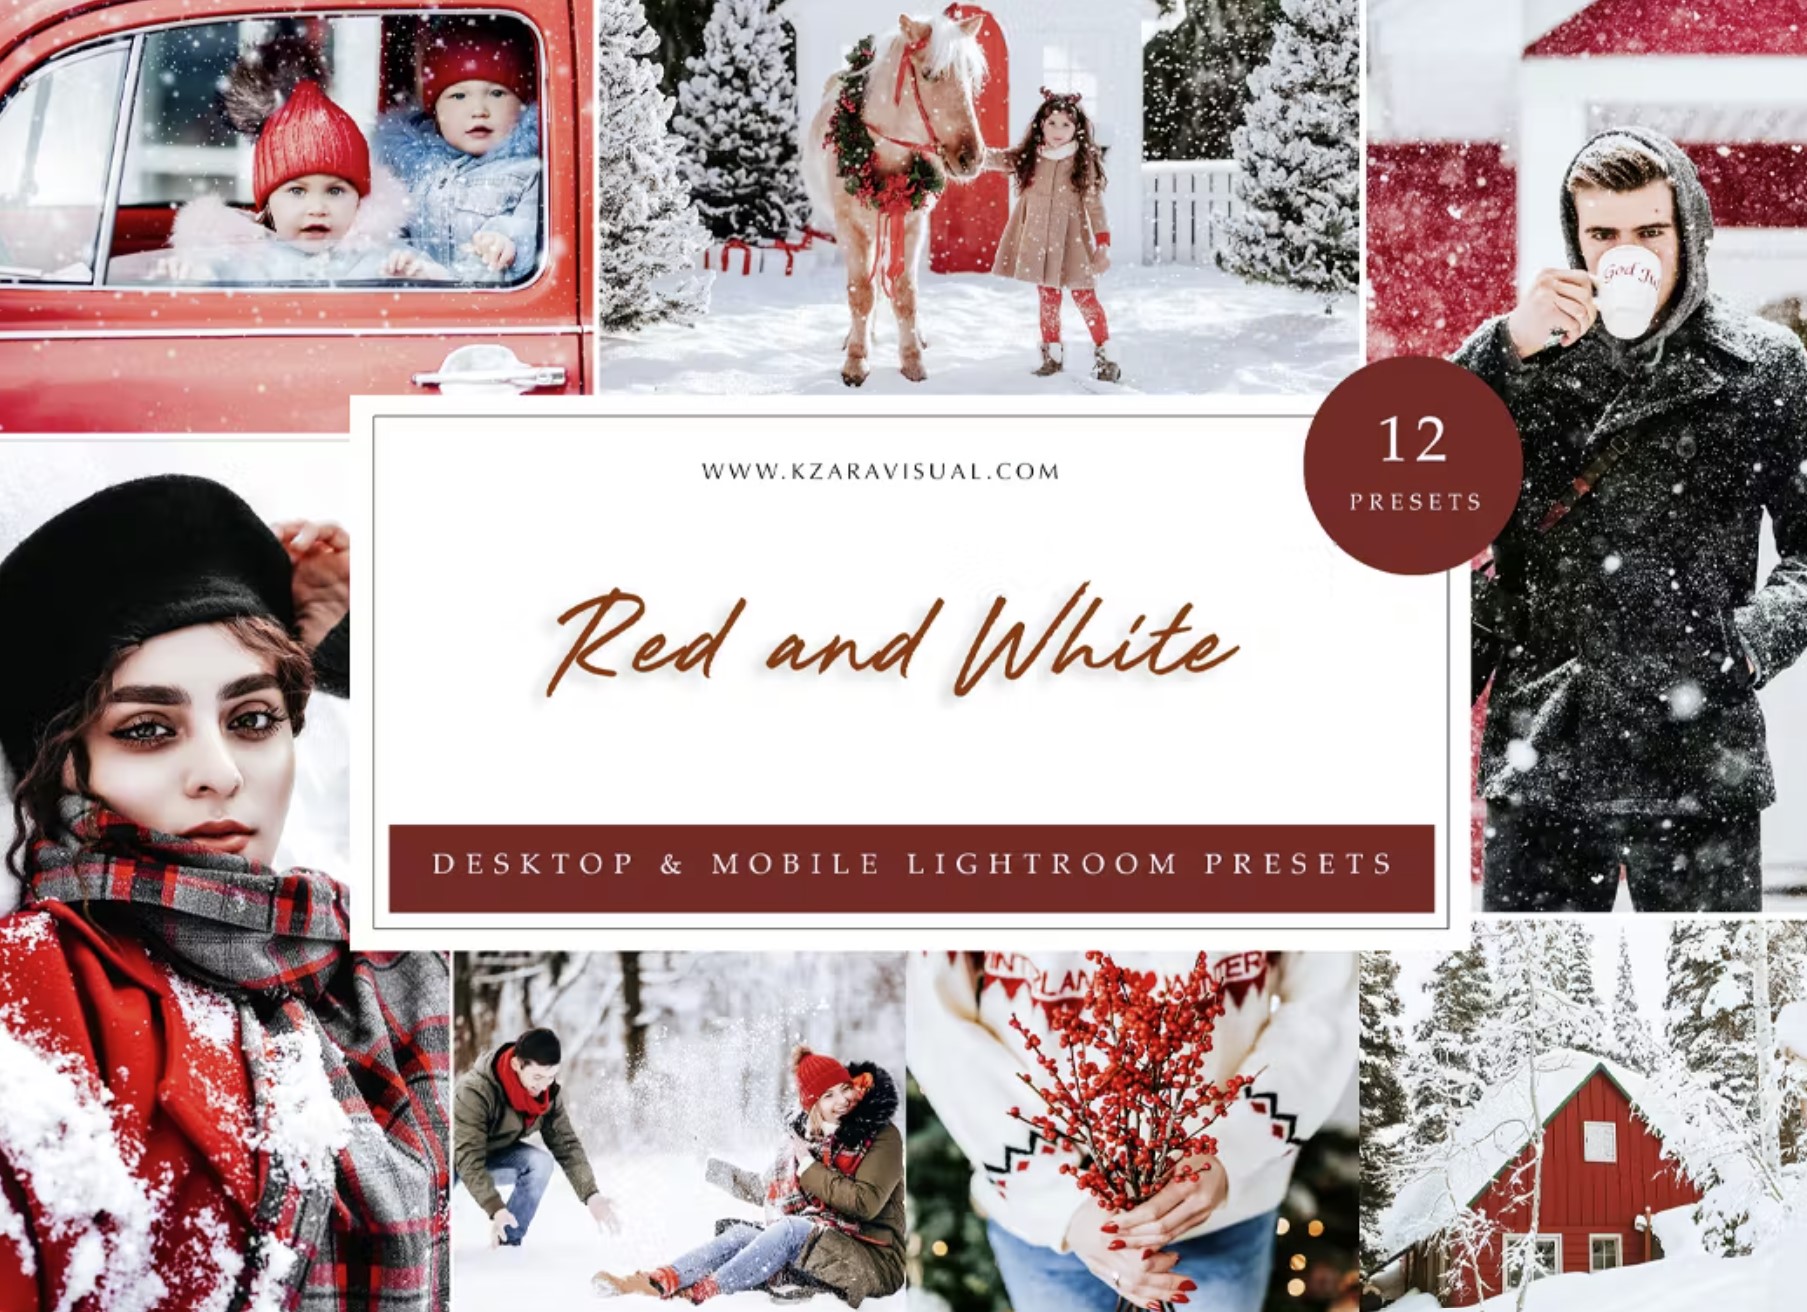 Red and White Presets